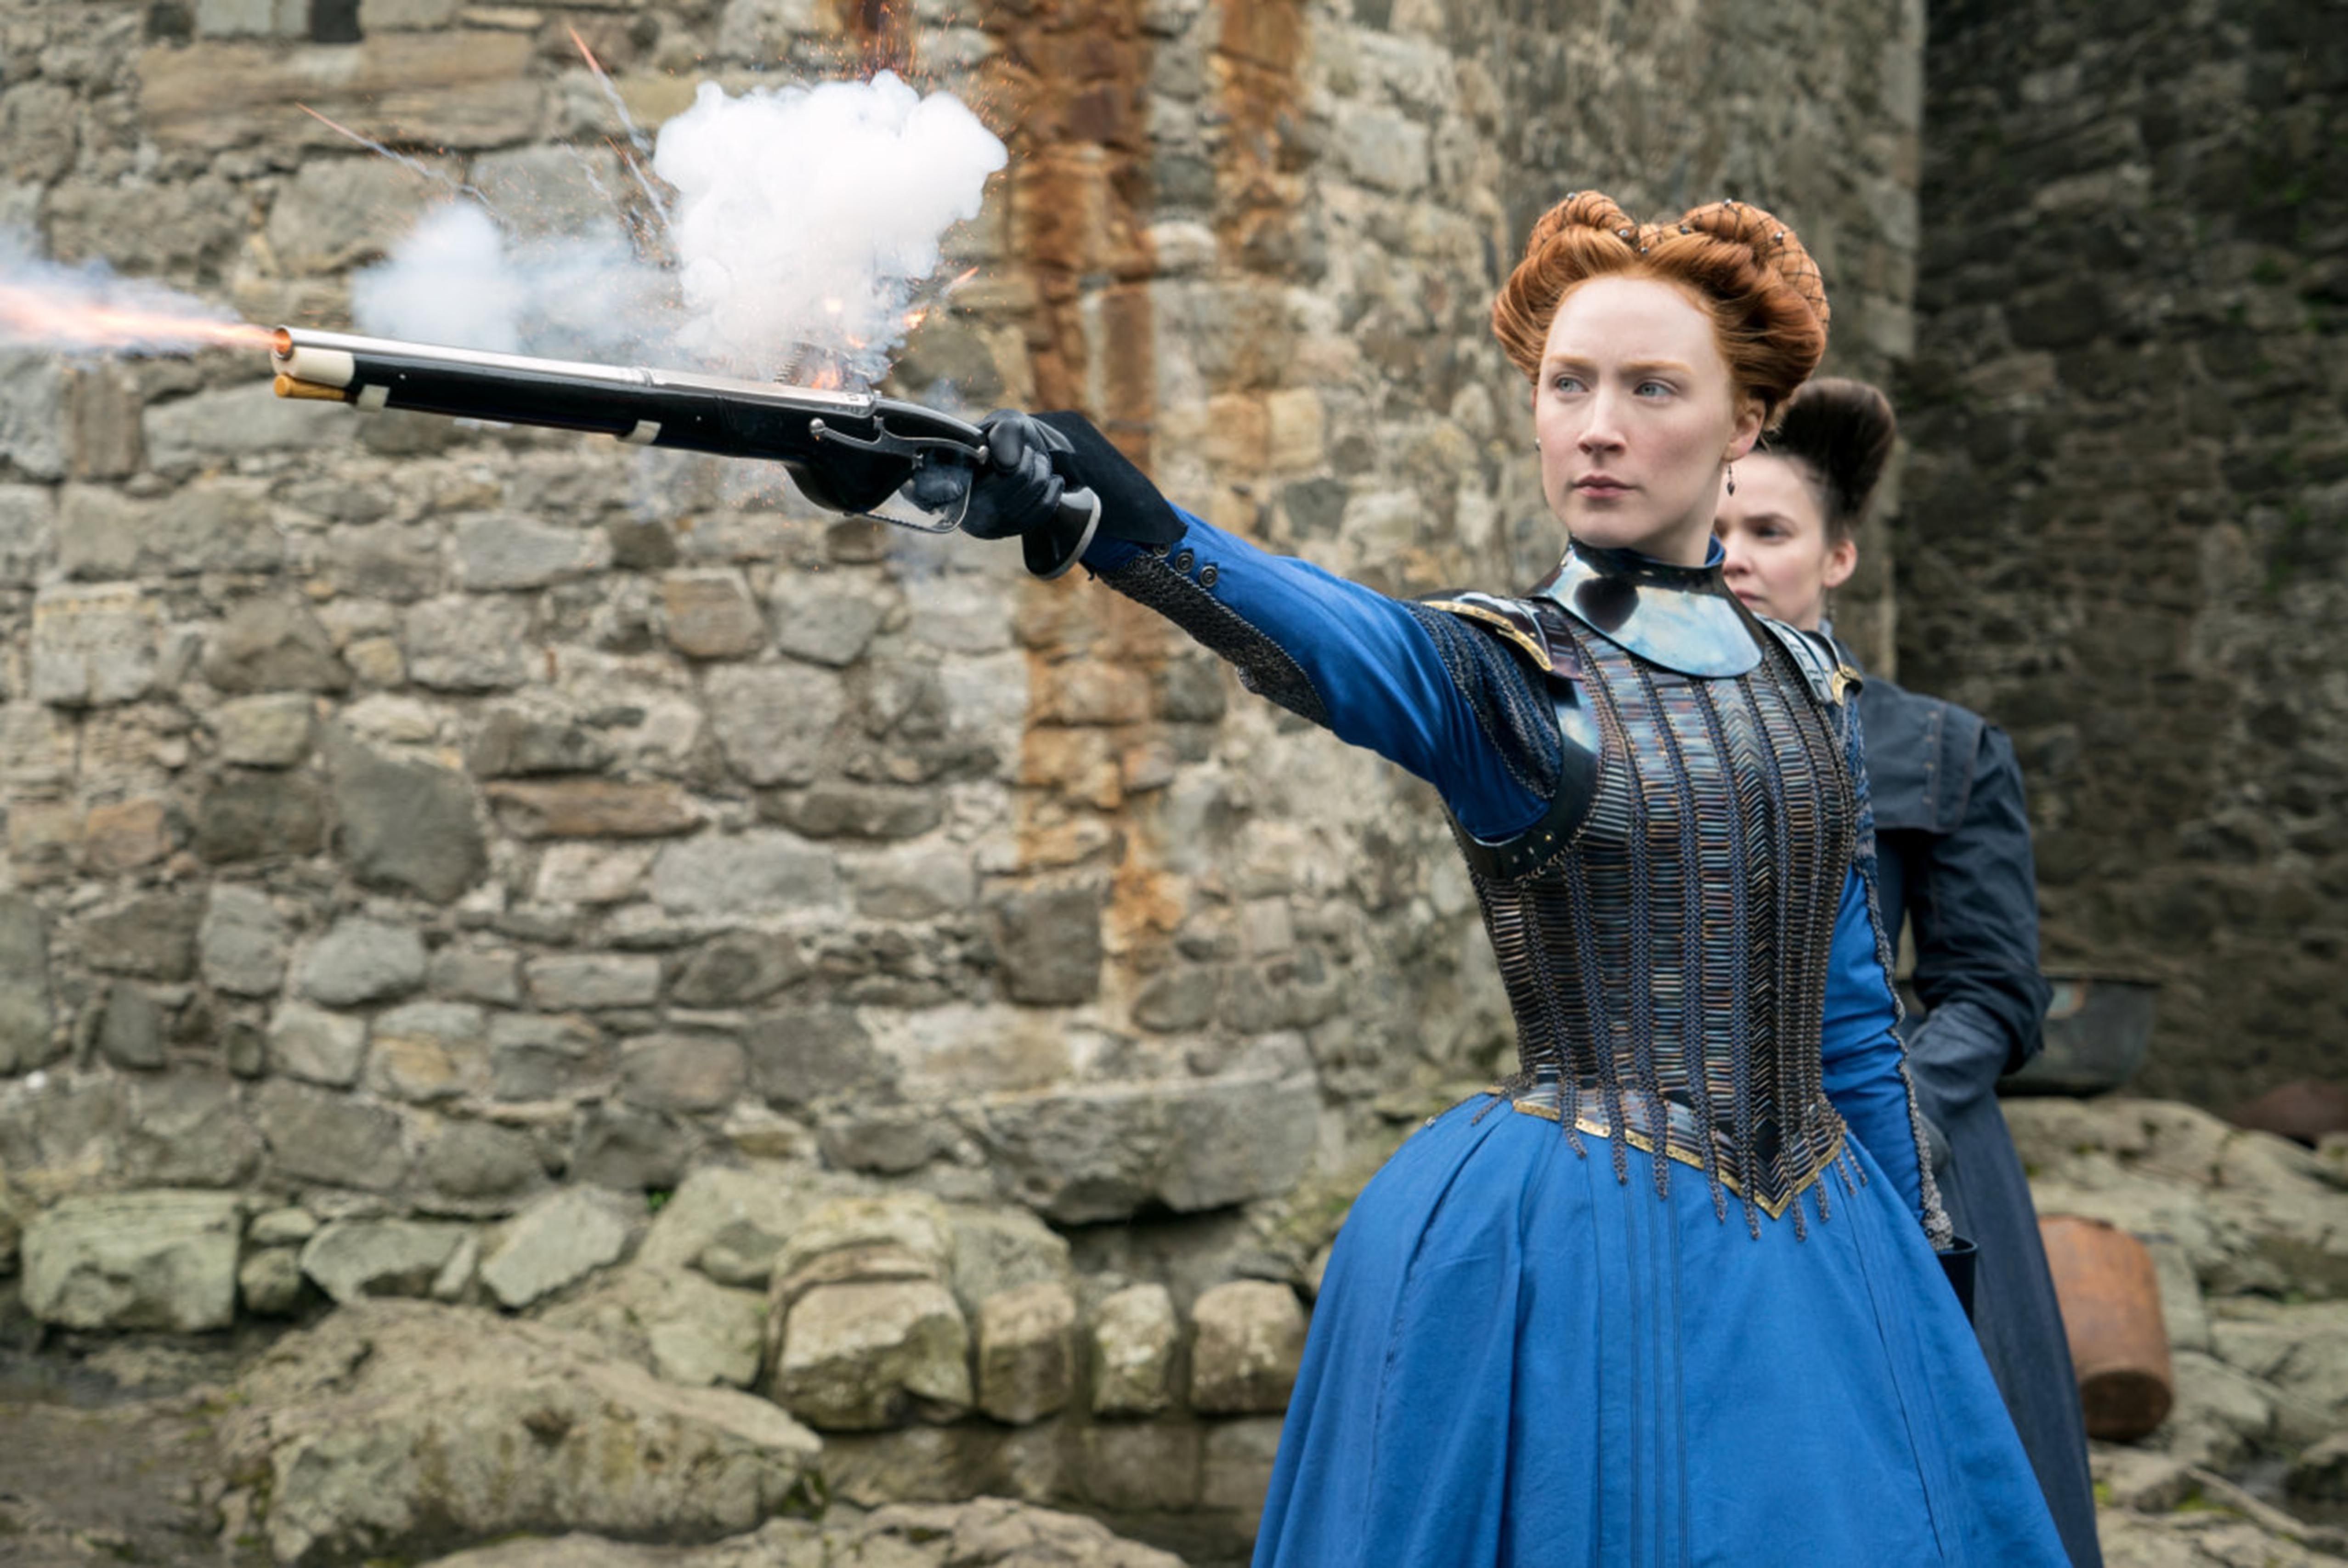 Saoirse Ronan on Mary Queen of Scots as Mary Stuart